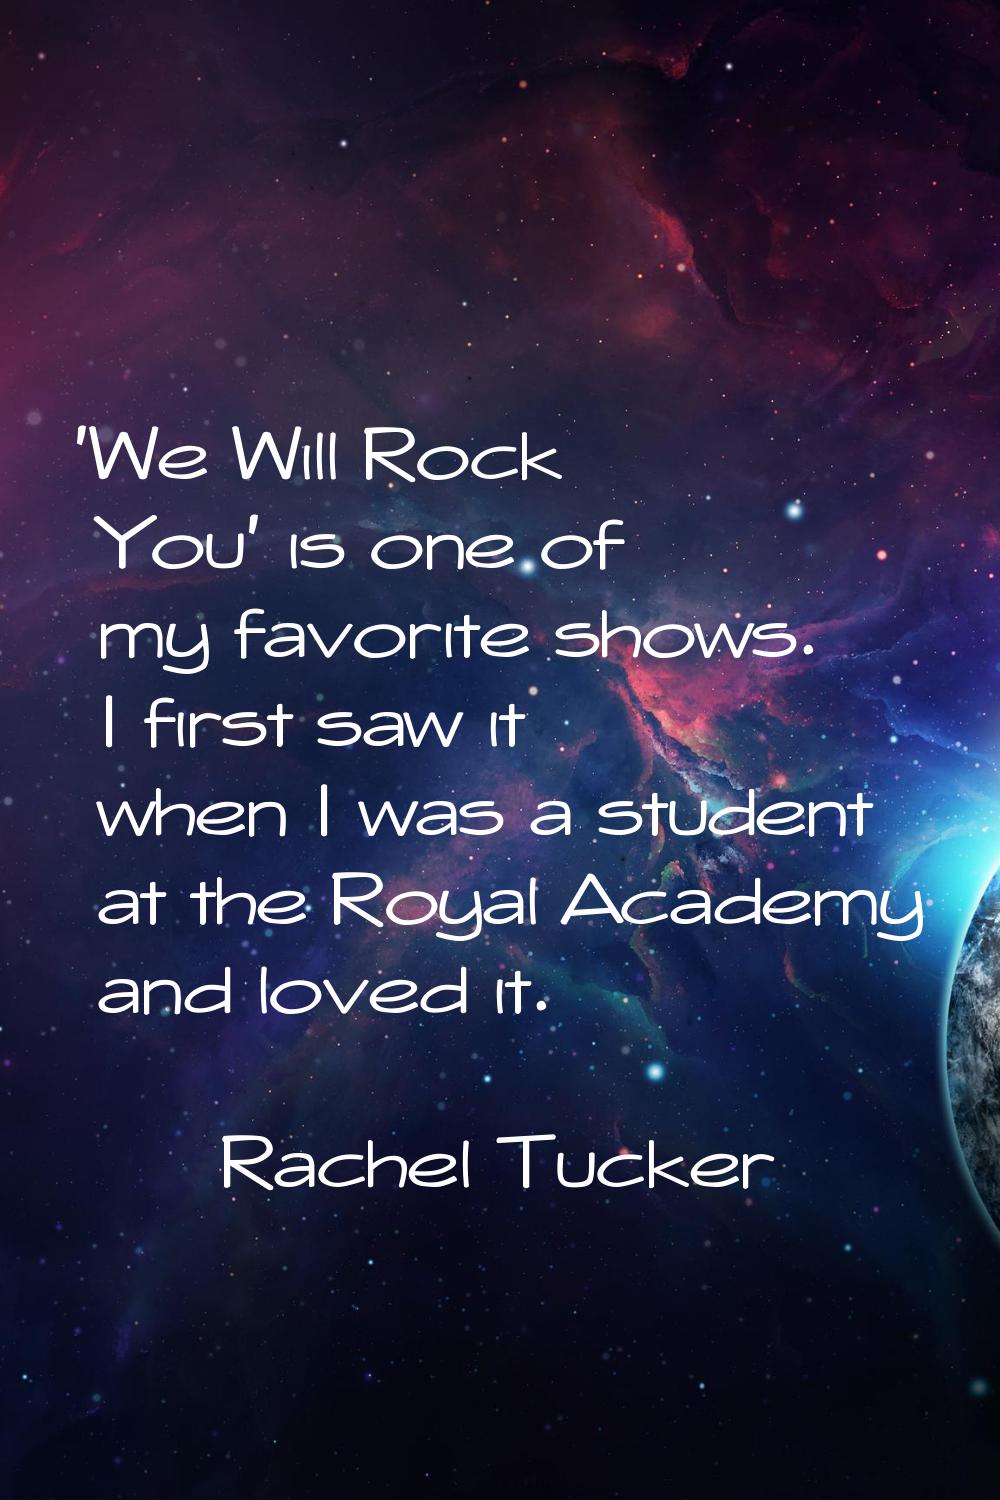 'We Will Rock You' is one of my favorite shows. I first saw it when I was a student at the Royal Ac